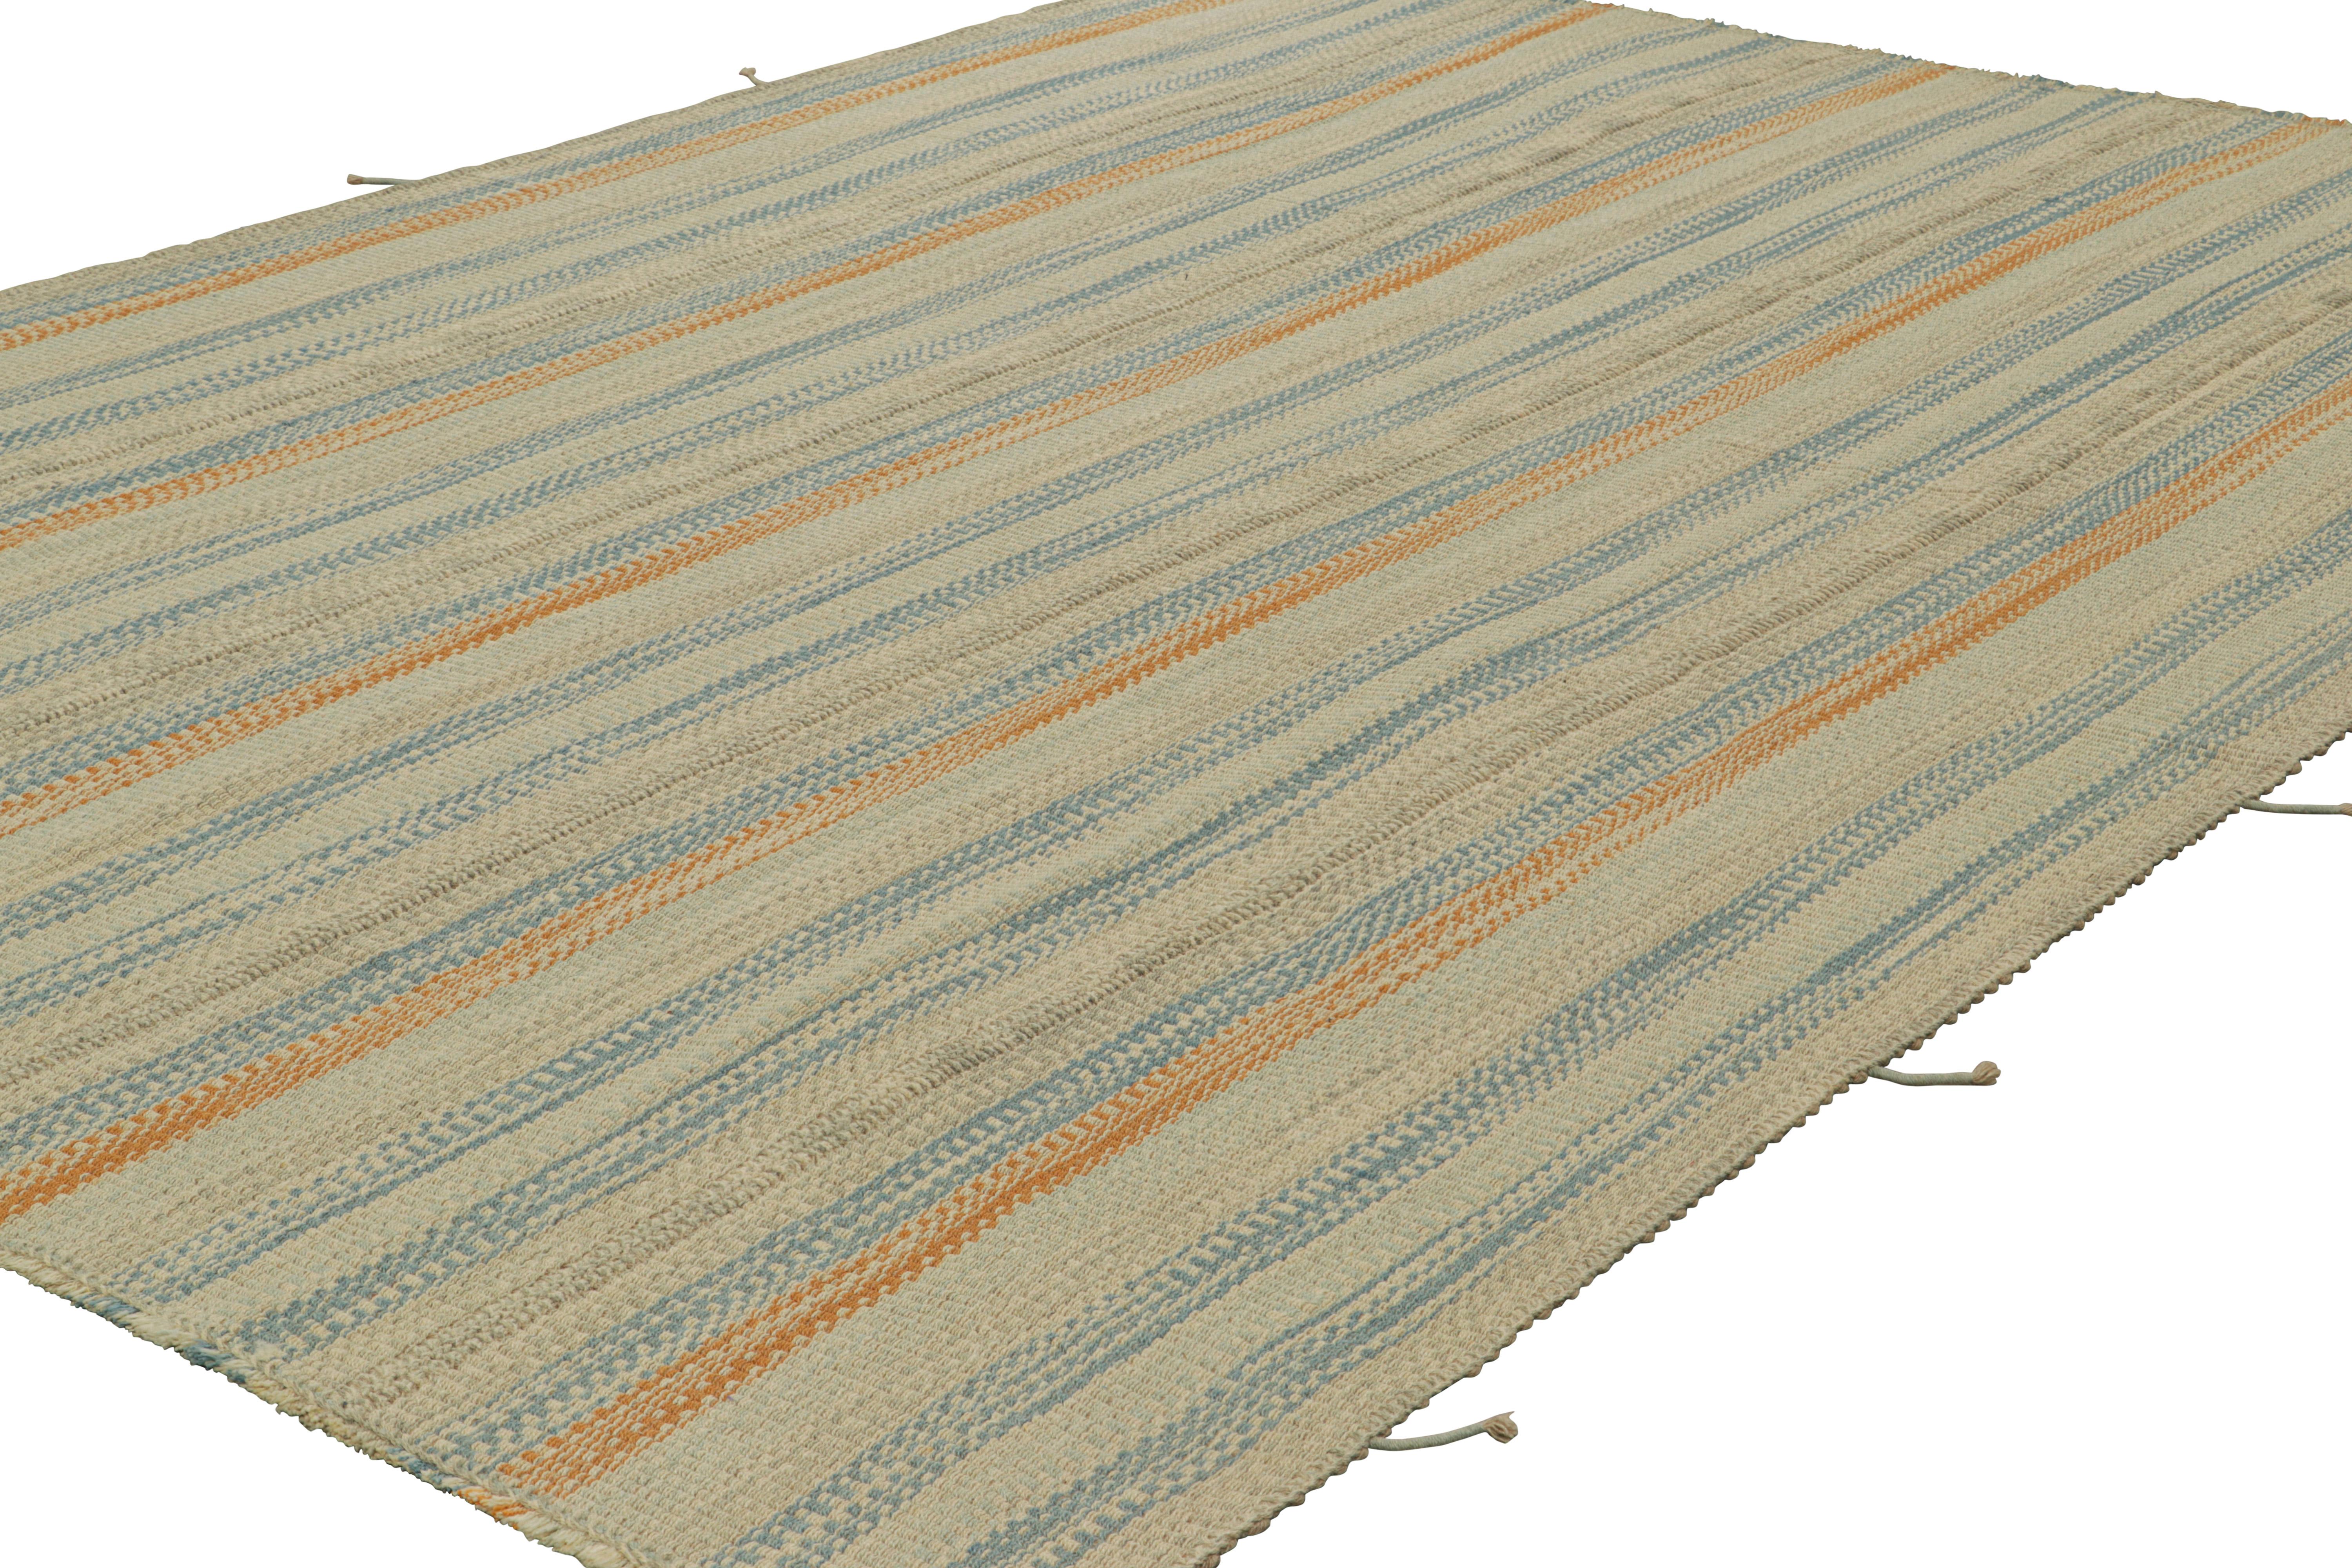 Afghan Rug & Kilim’s Contemporary Kilim in Beige, Rust and Blue Textural Stripes For Sale